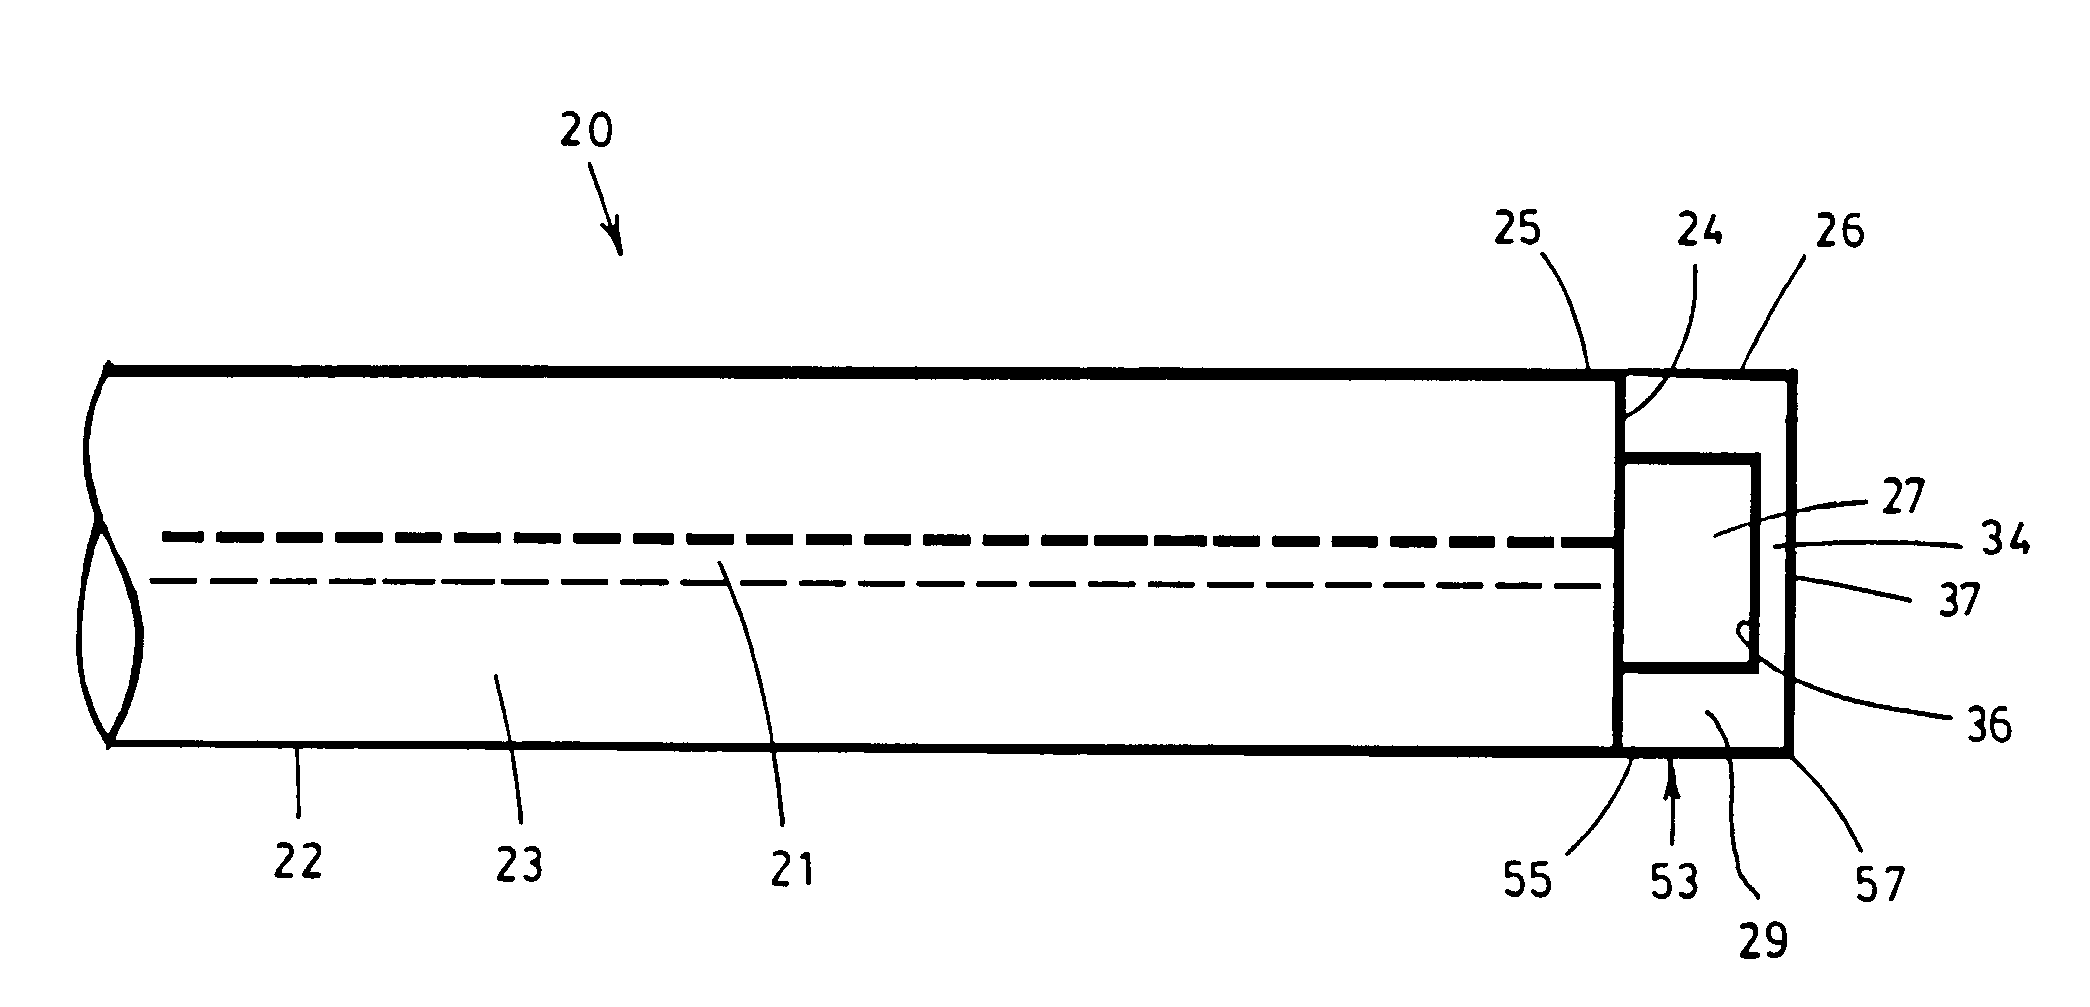 Single piece fabry-perot optical sensor and method of manufacturing the same